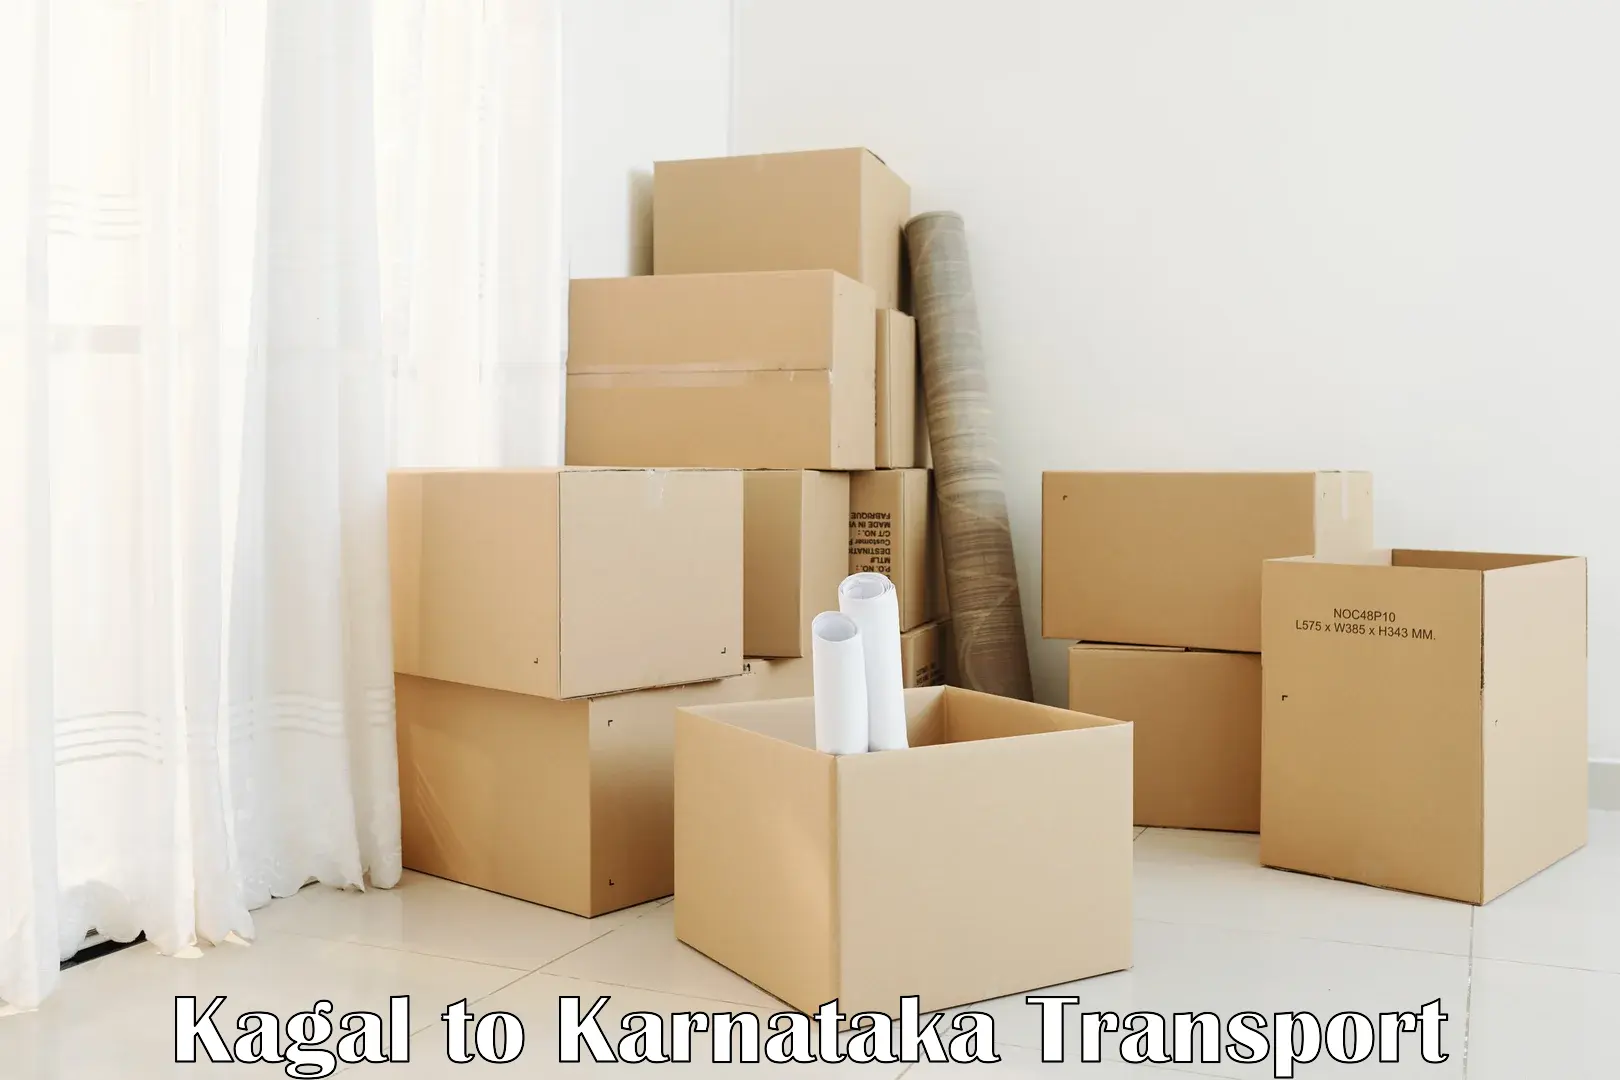 Truck transport companies in India in Kagal to Chittapur